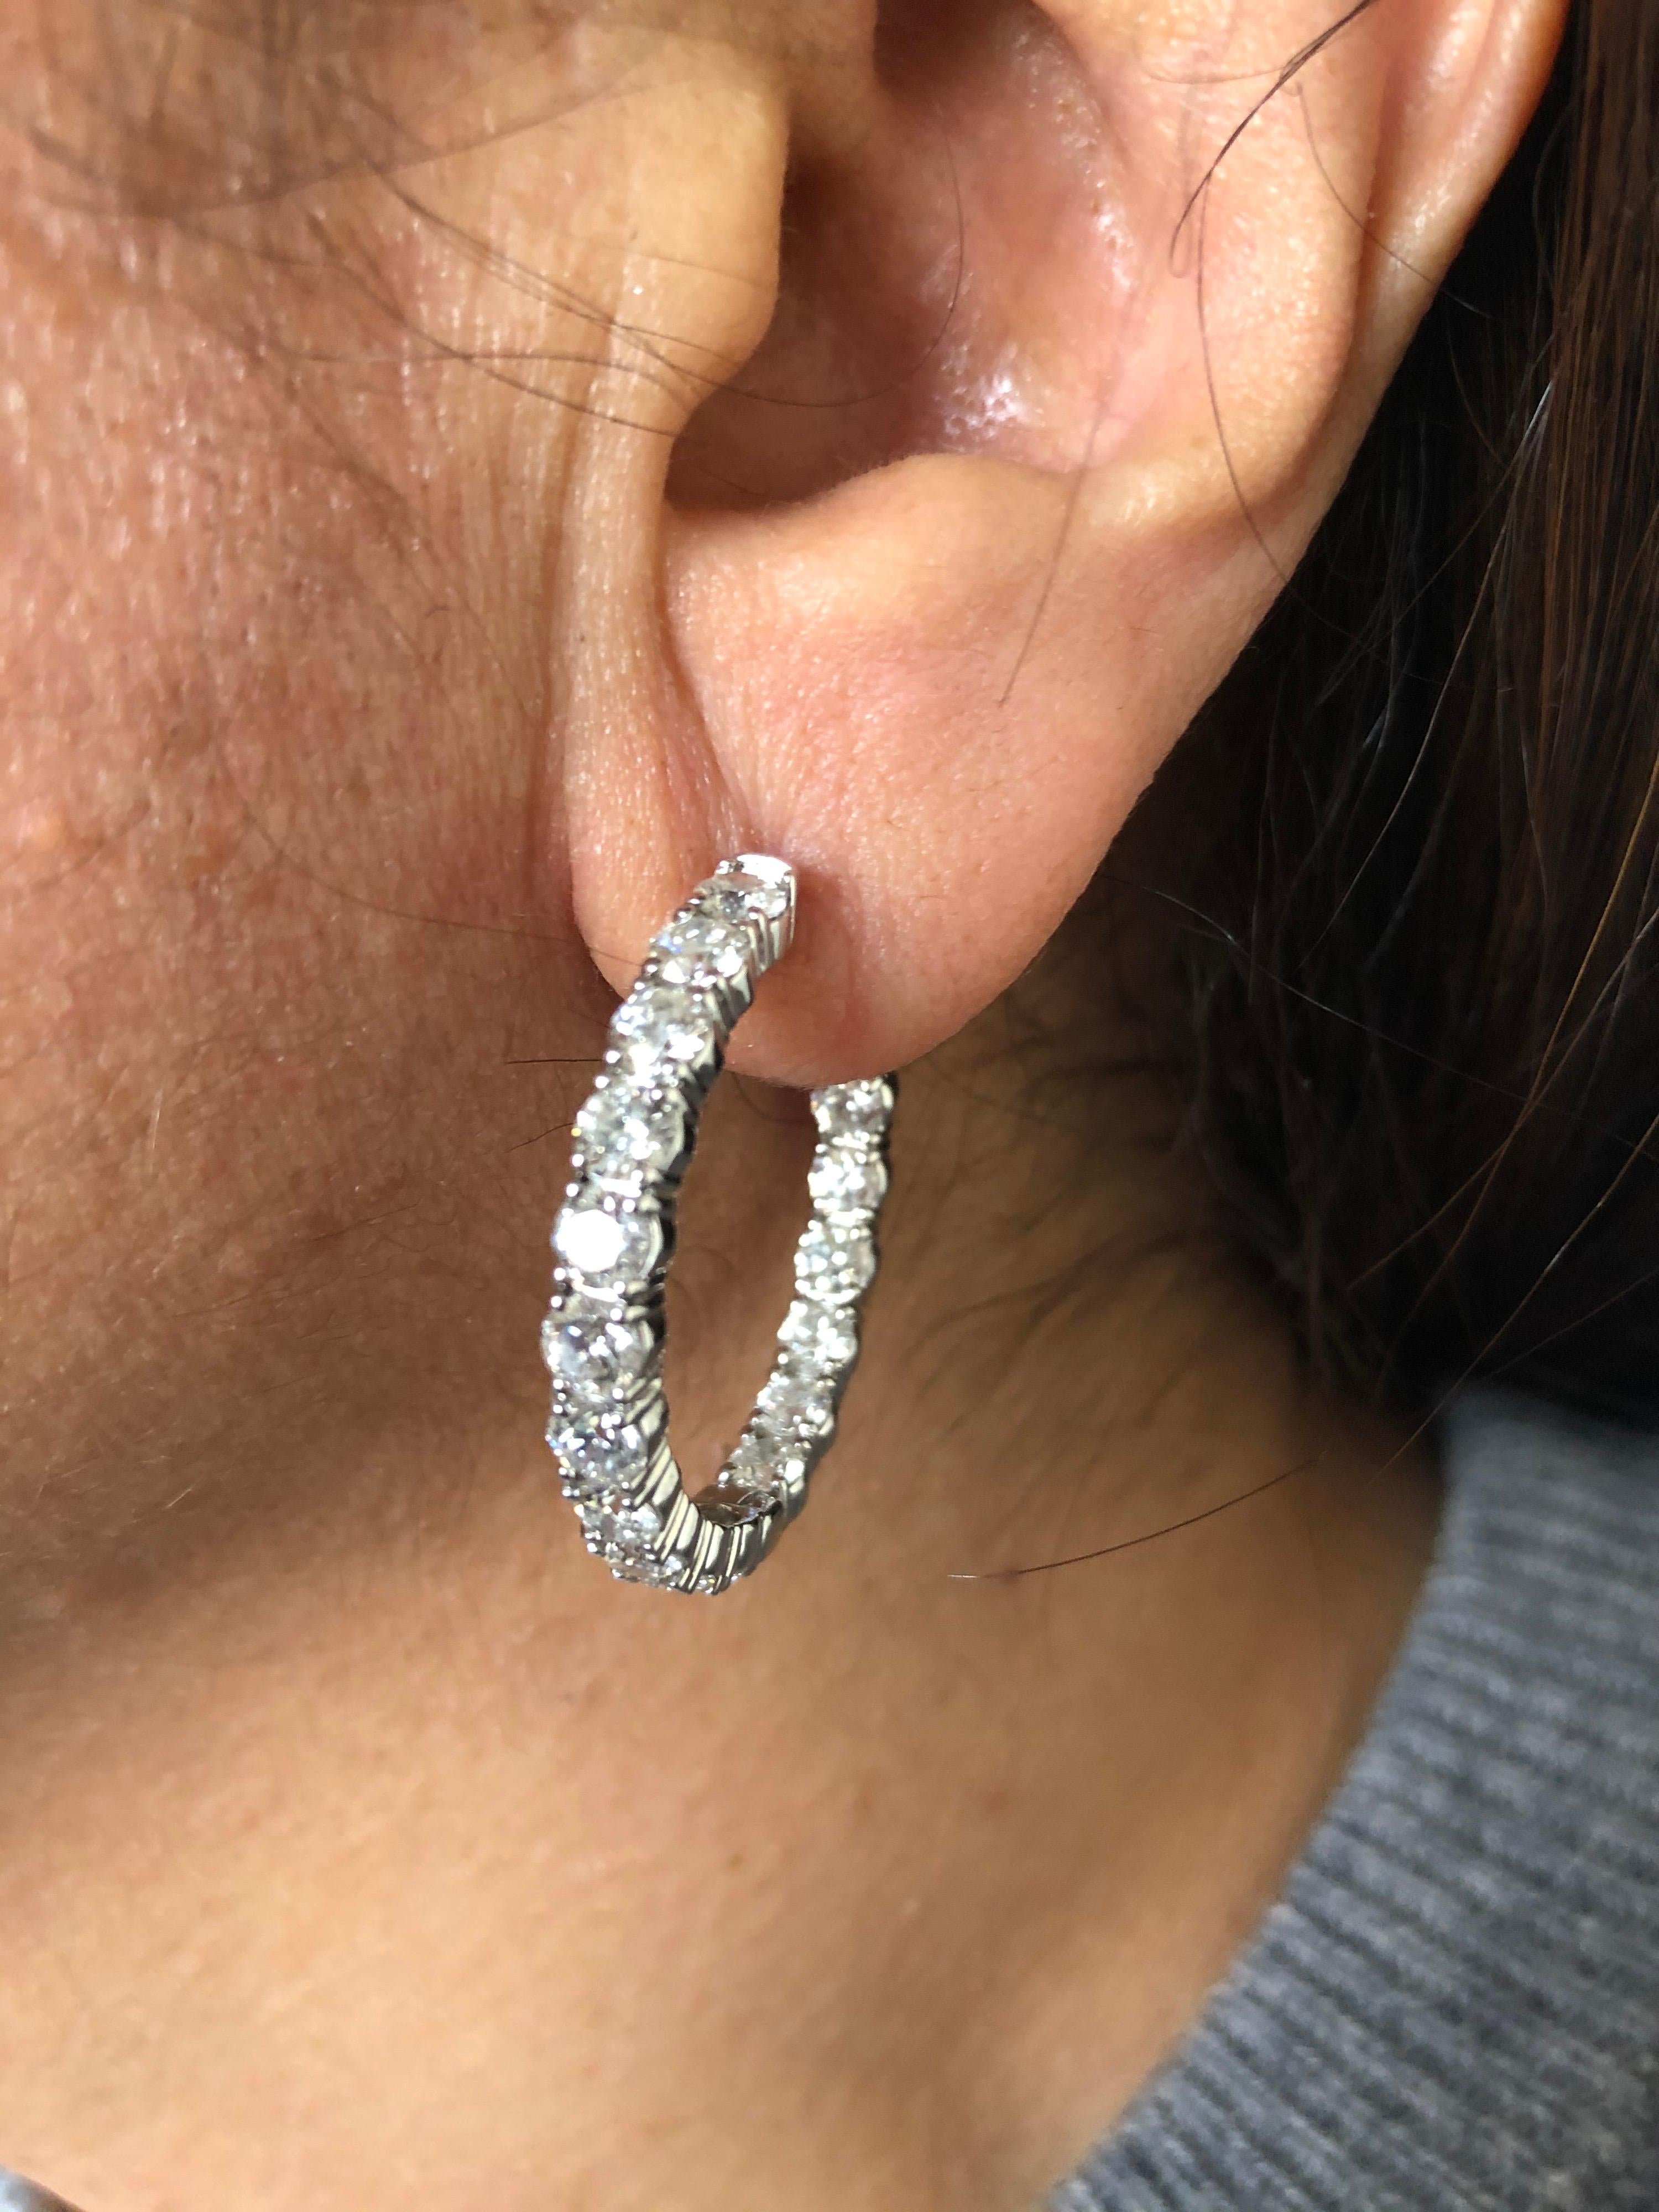 Inside and out diamond hoop earrings set in 14K white gold. The diameter is 1.25 Inches. Each stone weighs 0.20 carats and the total carat weight is 7.20. The color of the stones are G-H, the clarity is SI1.